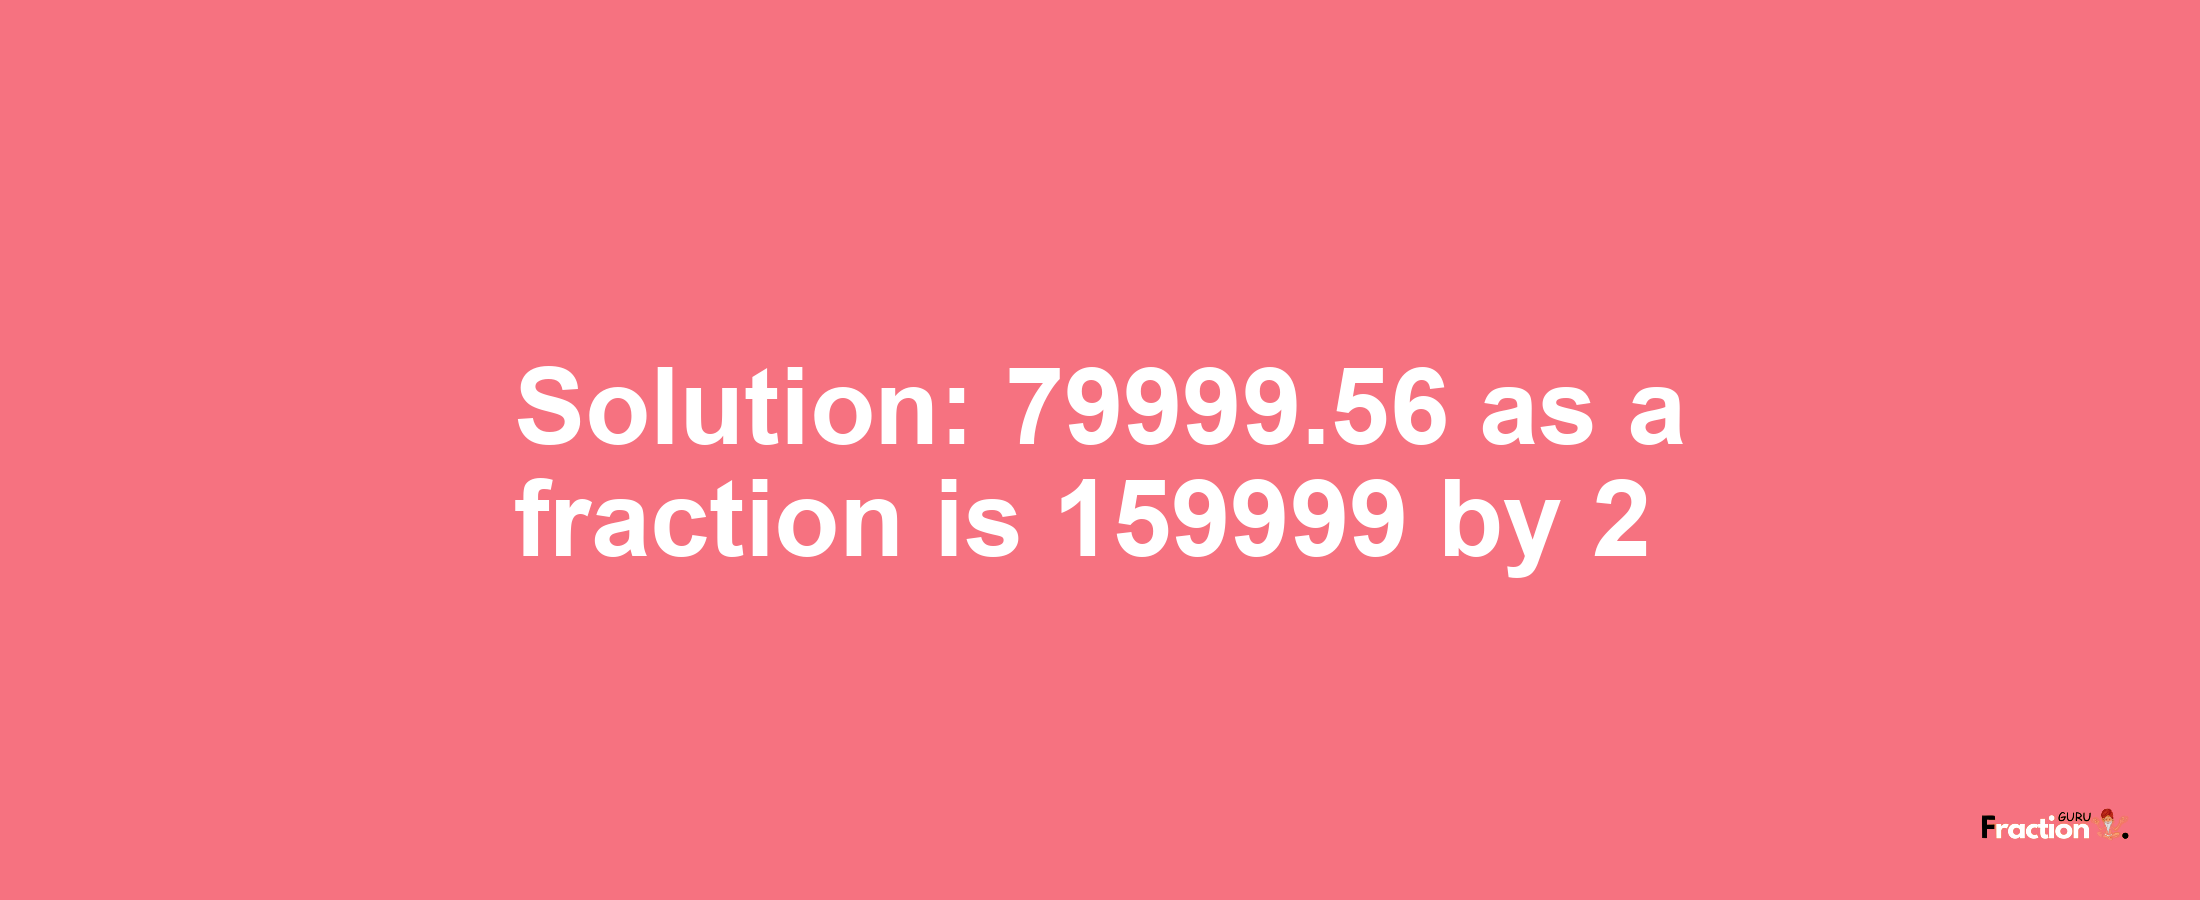 Solution:79999.56 as a fraction is 159999/2